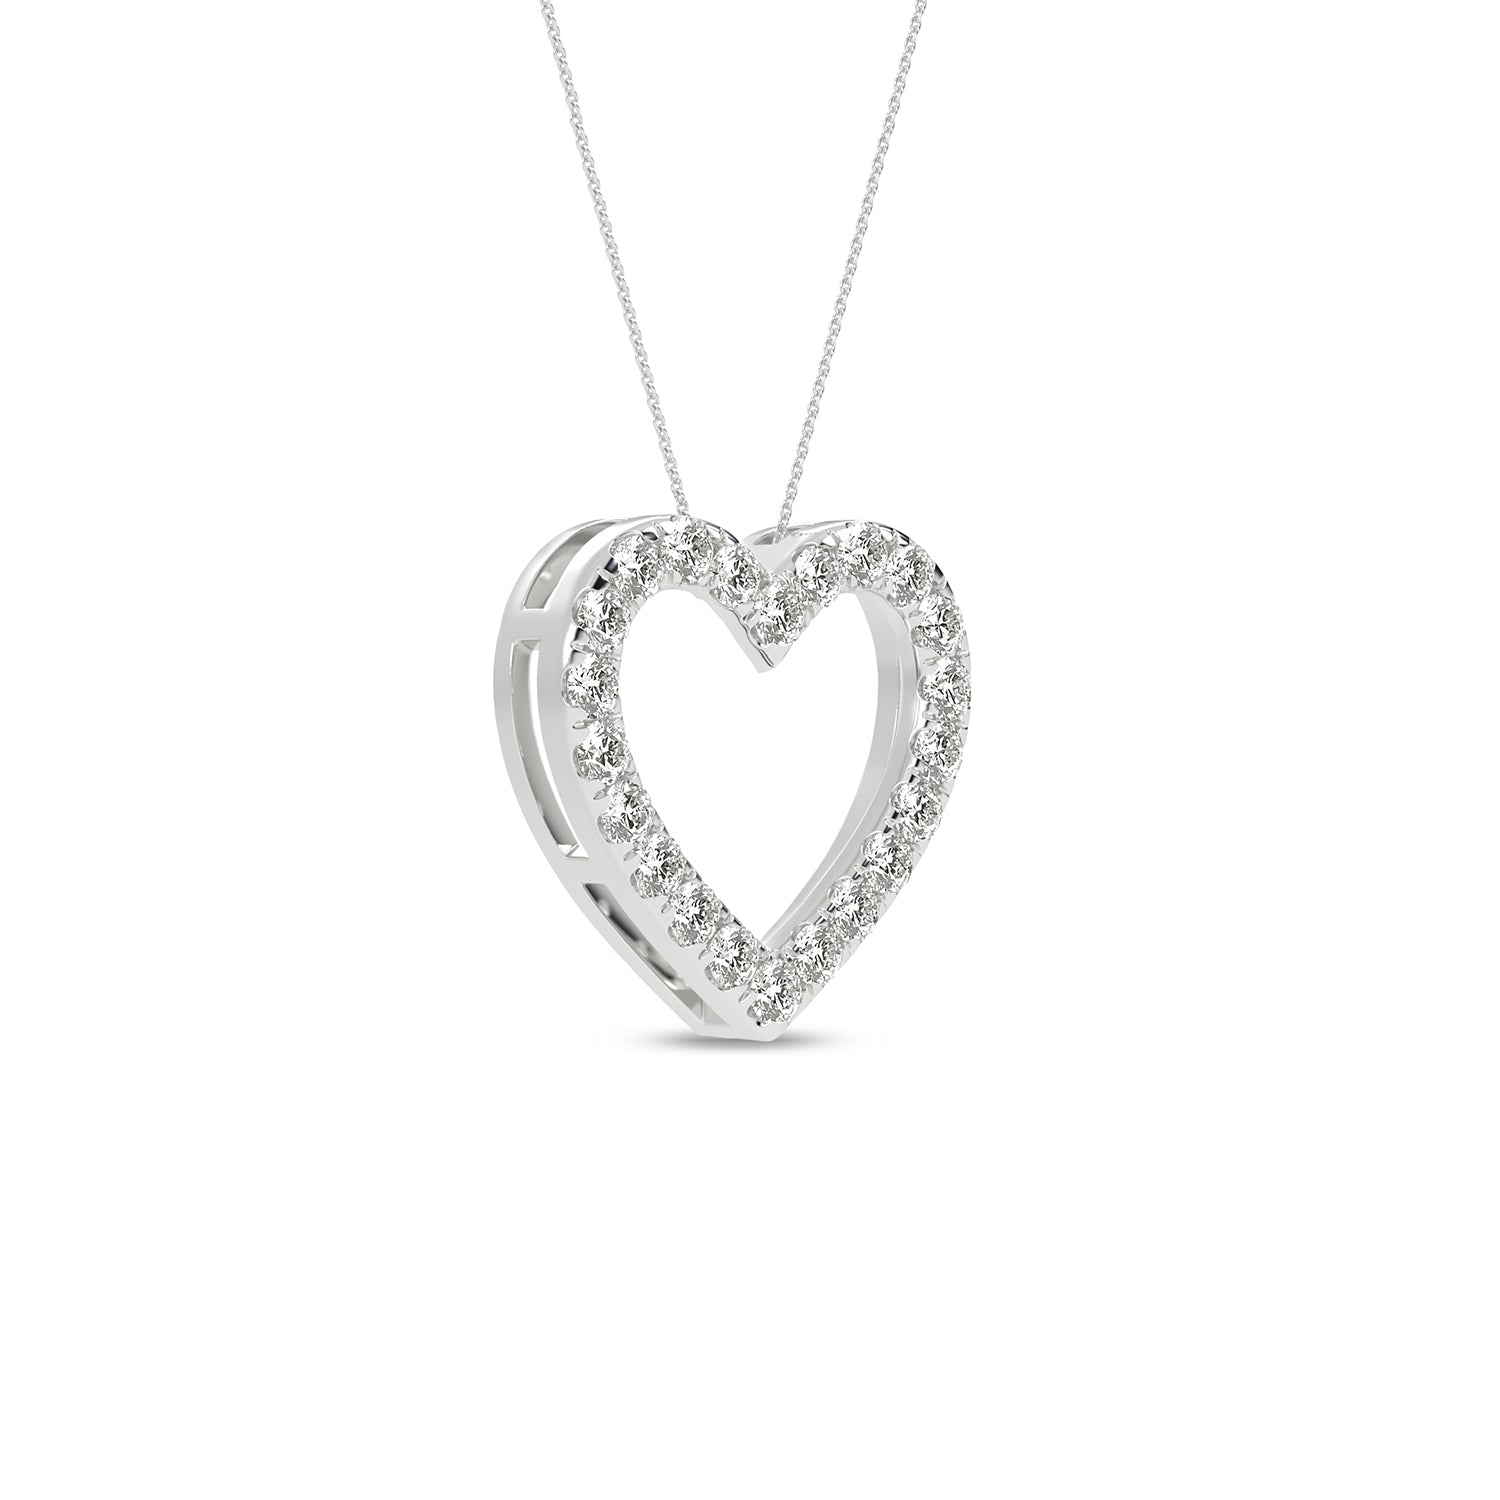 Atmos Heart Silhouette Necklace_Product Angle_1/2 Ct. - 2